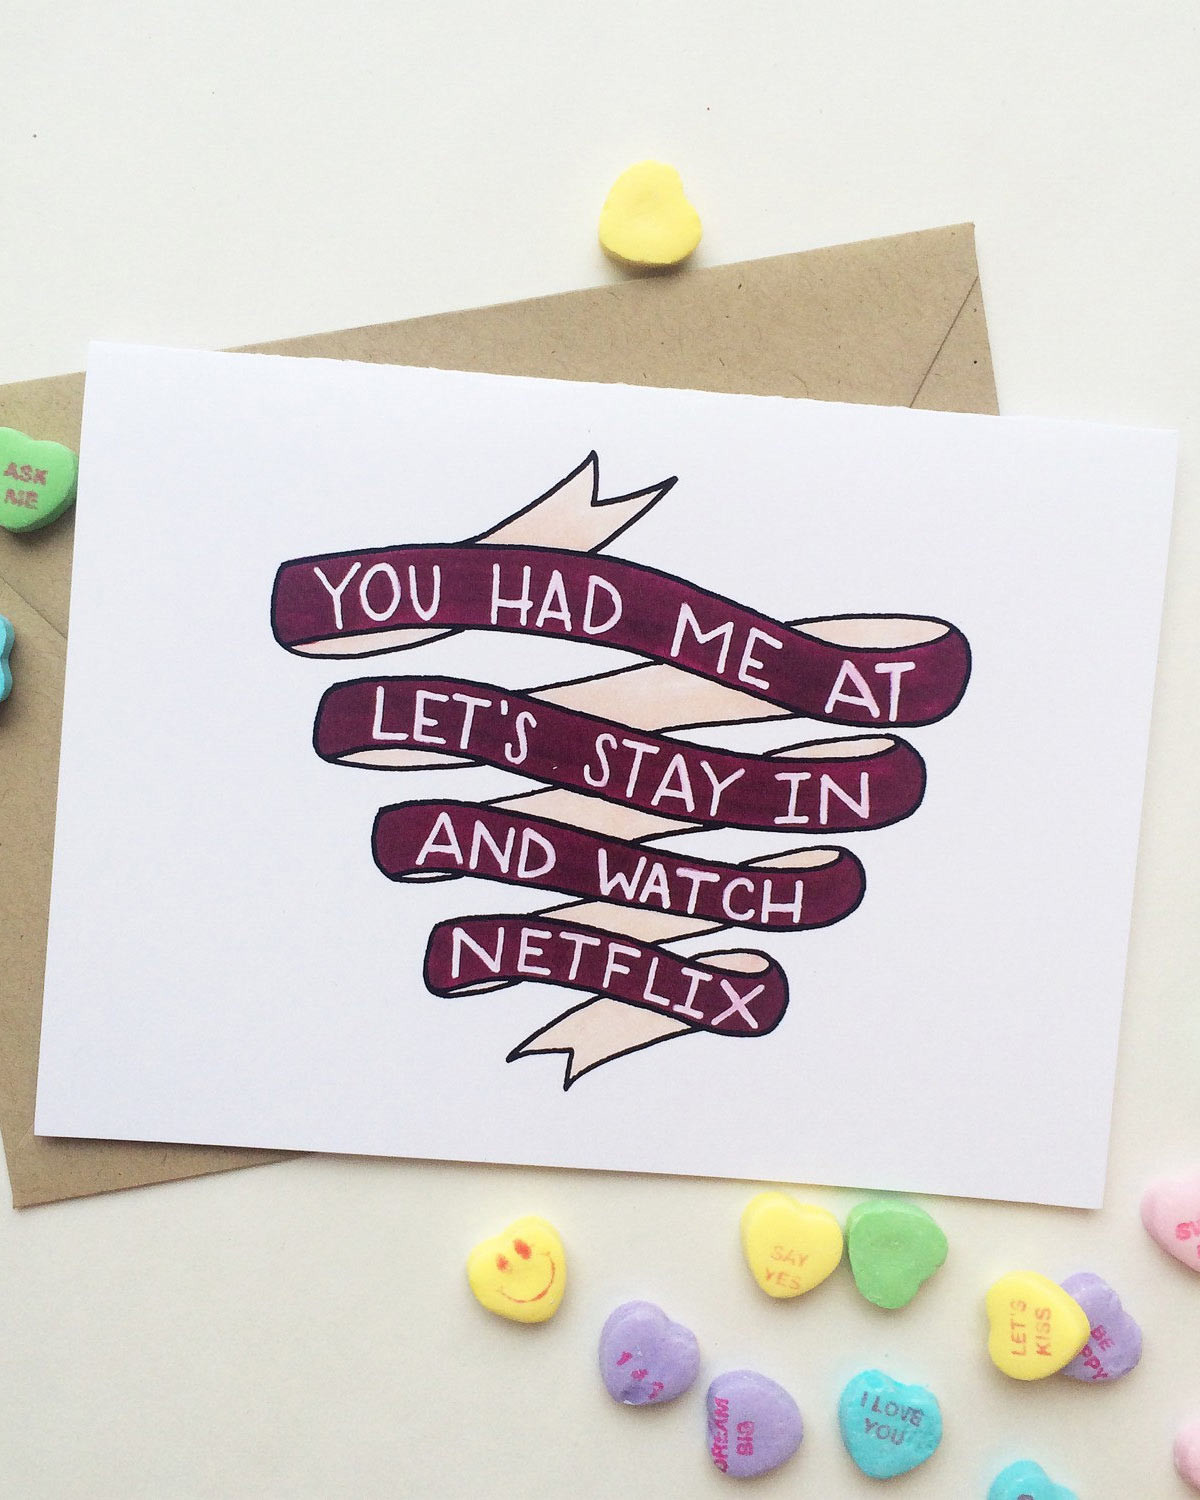 printable-funny-valentine-s-day-cards-about-a-mom